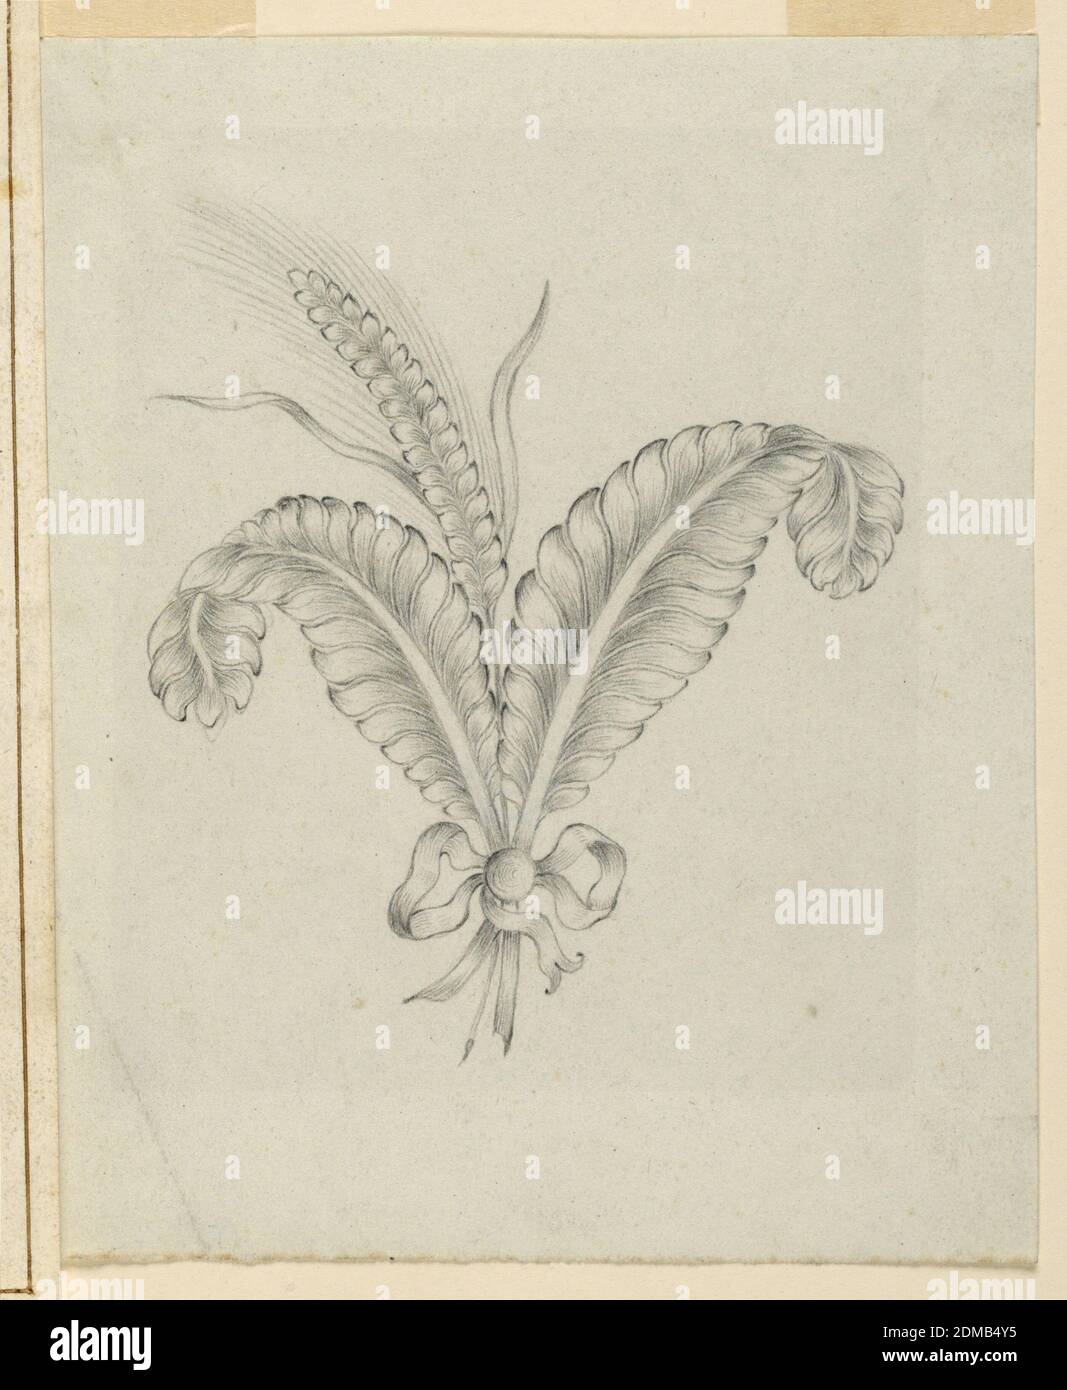 Design for a Corsage, Graphite on paper, Jewelry design for a corsage brooch. Two leaves, ears of barlet, and a knot of ribbon., Italy, ca. 1830, jewelry, Drawing Stock Photo